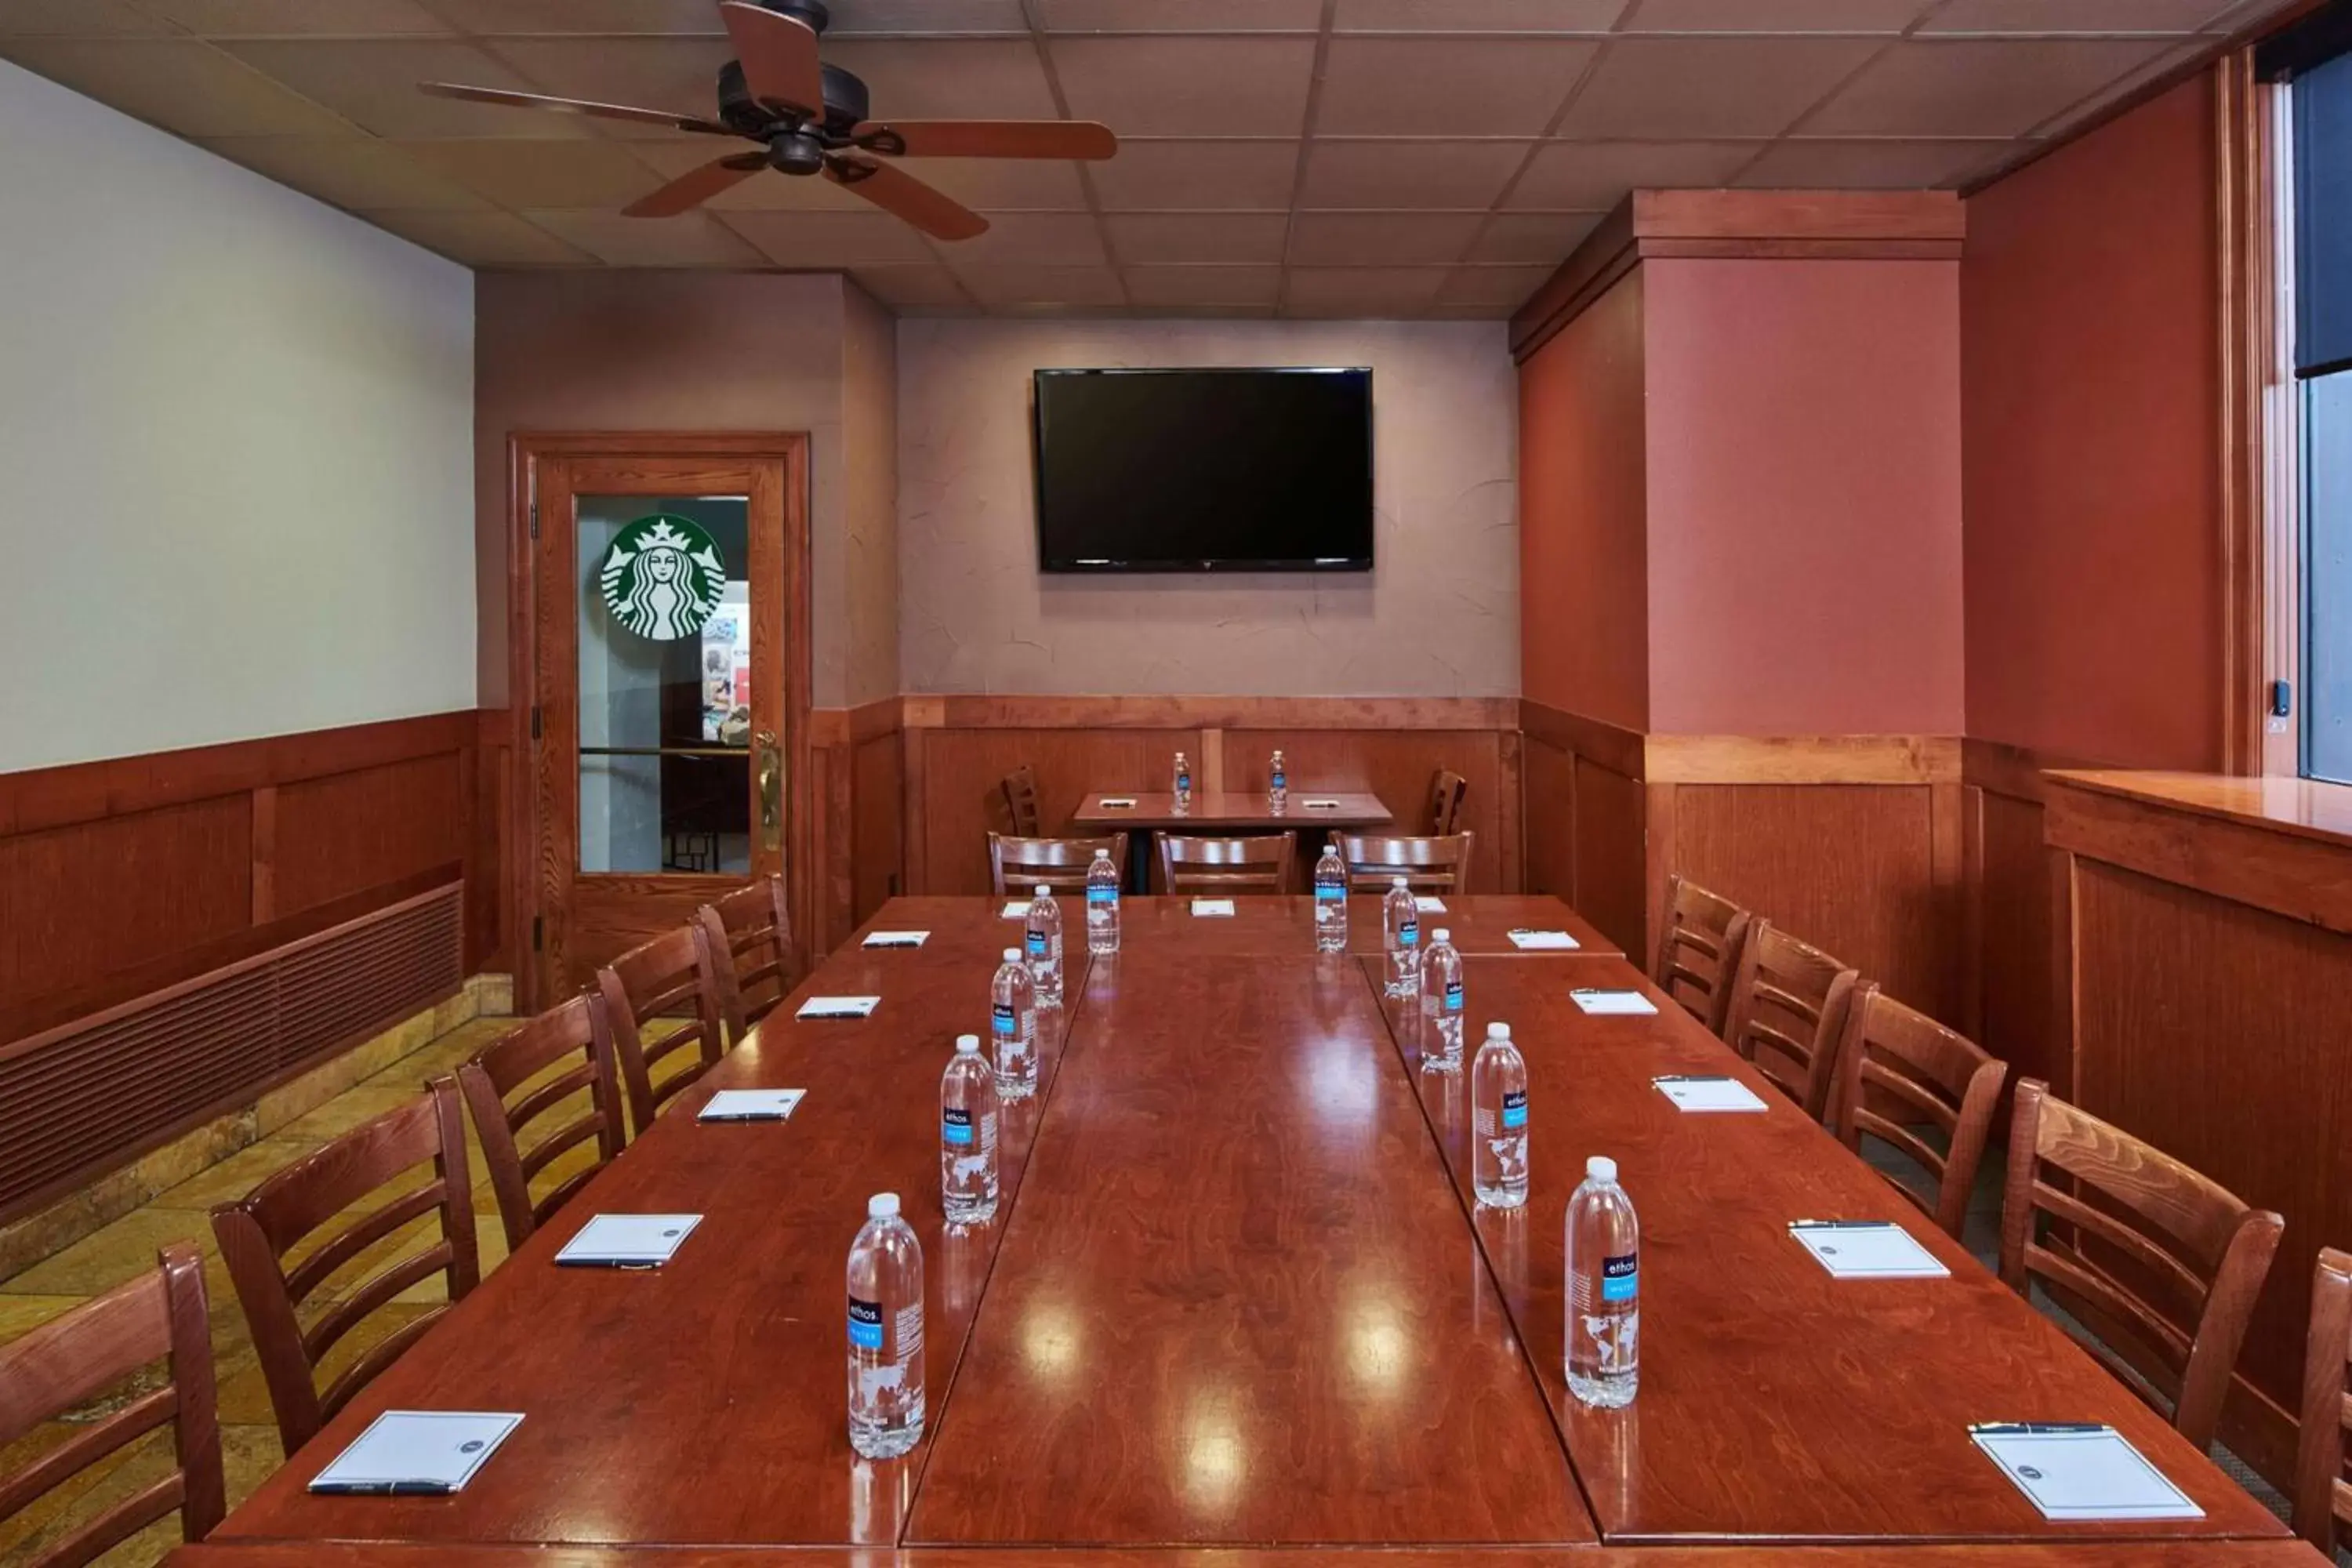 Meeting/conference room in Hotel Alex Johnson Rapid City, Curio Collection by Hilton